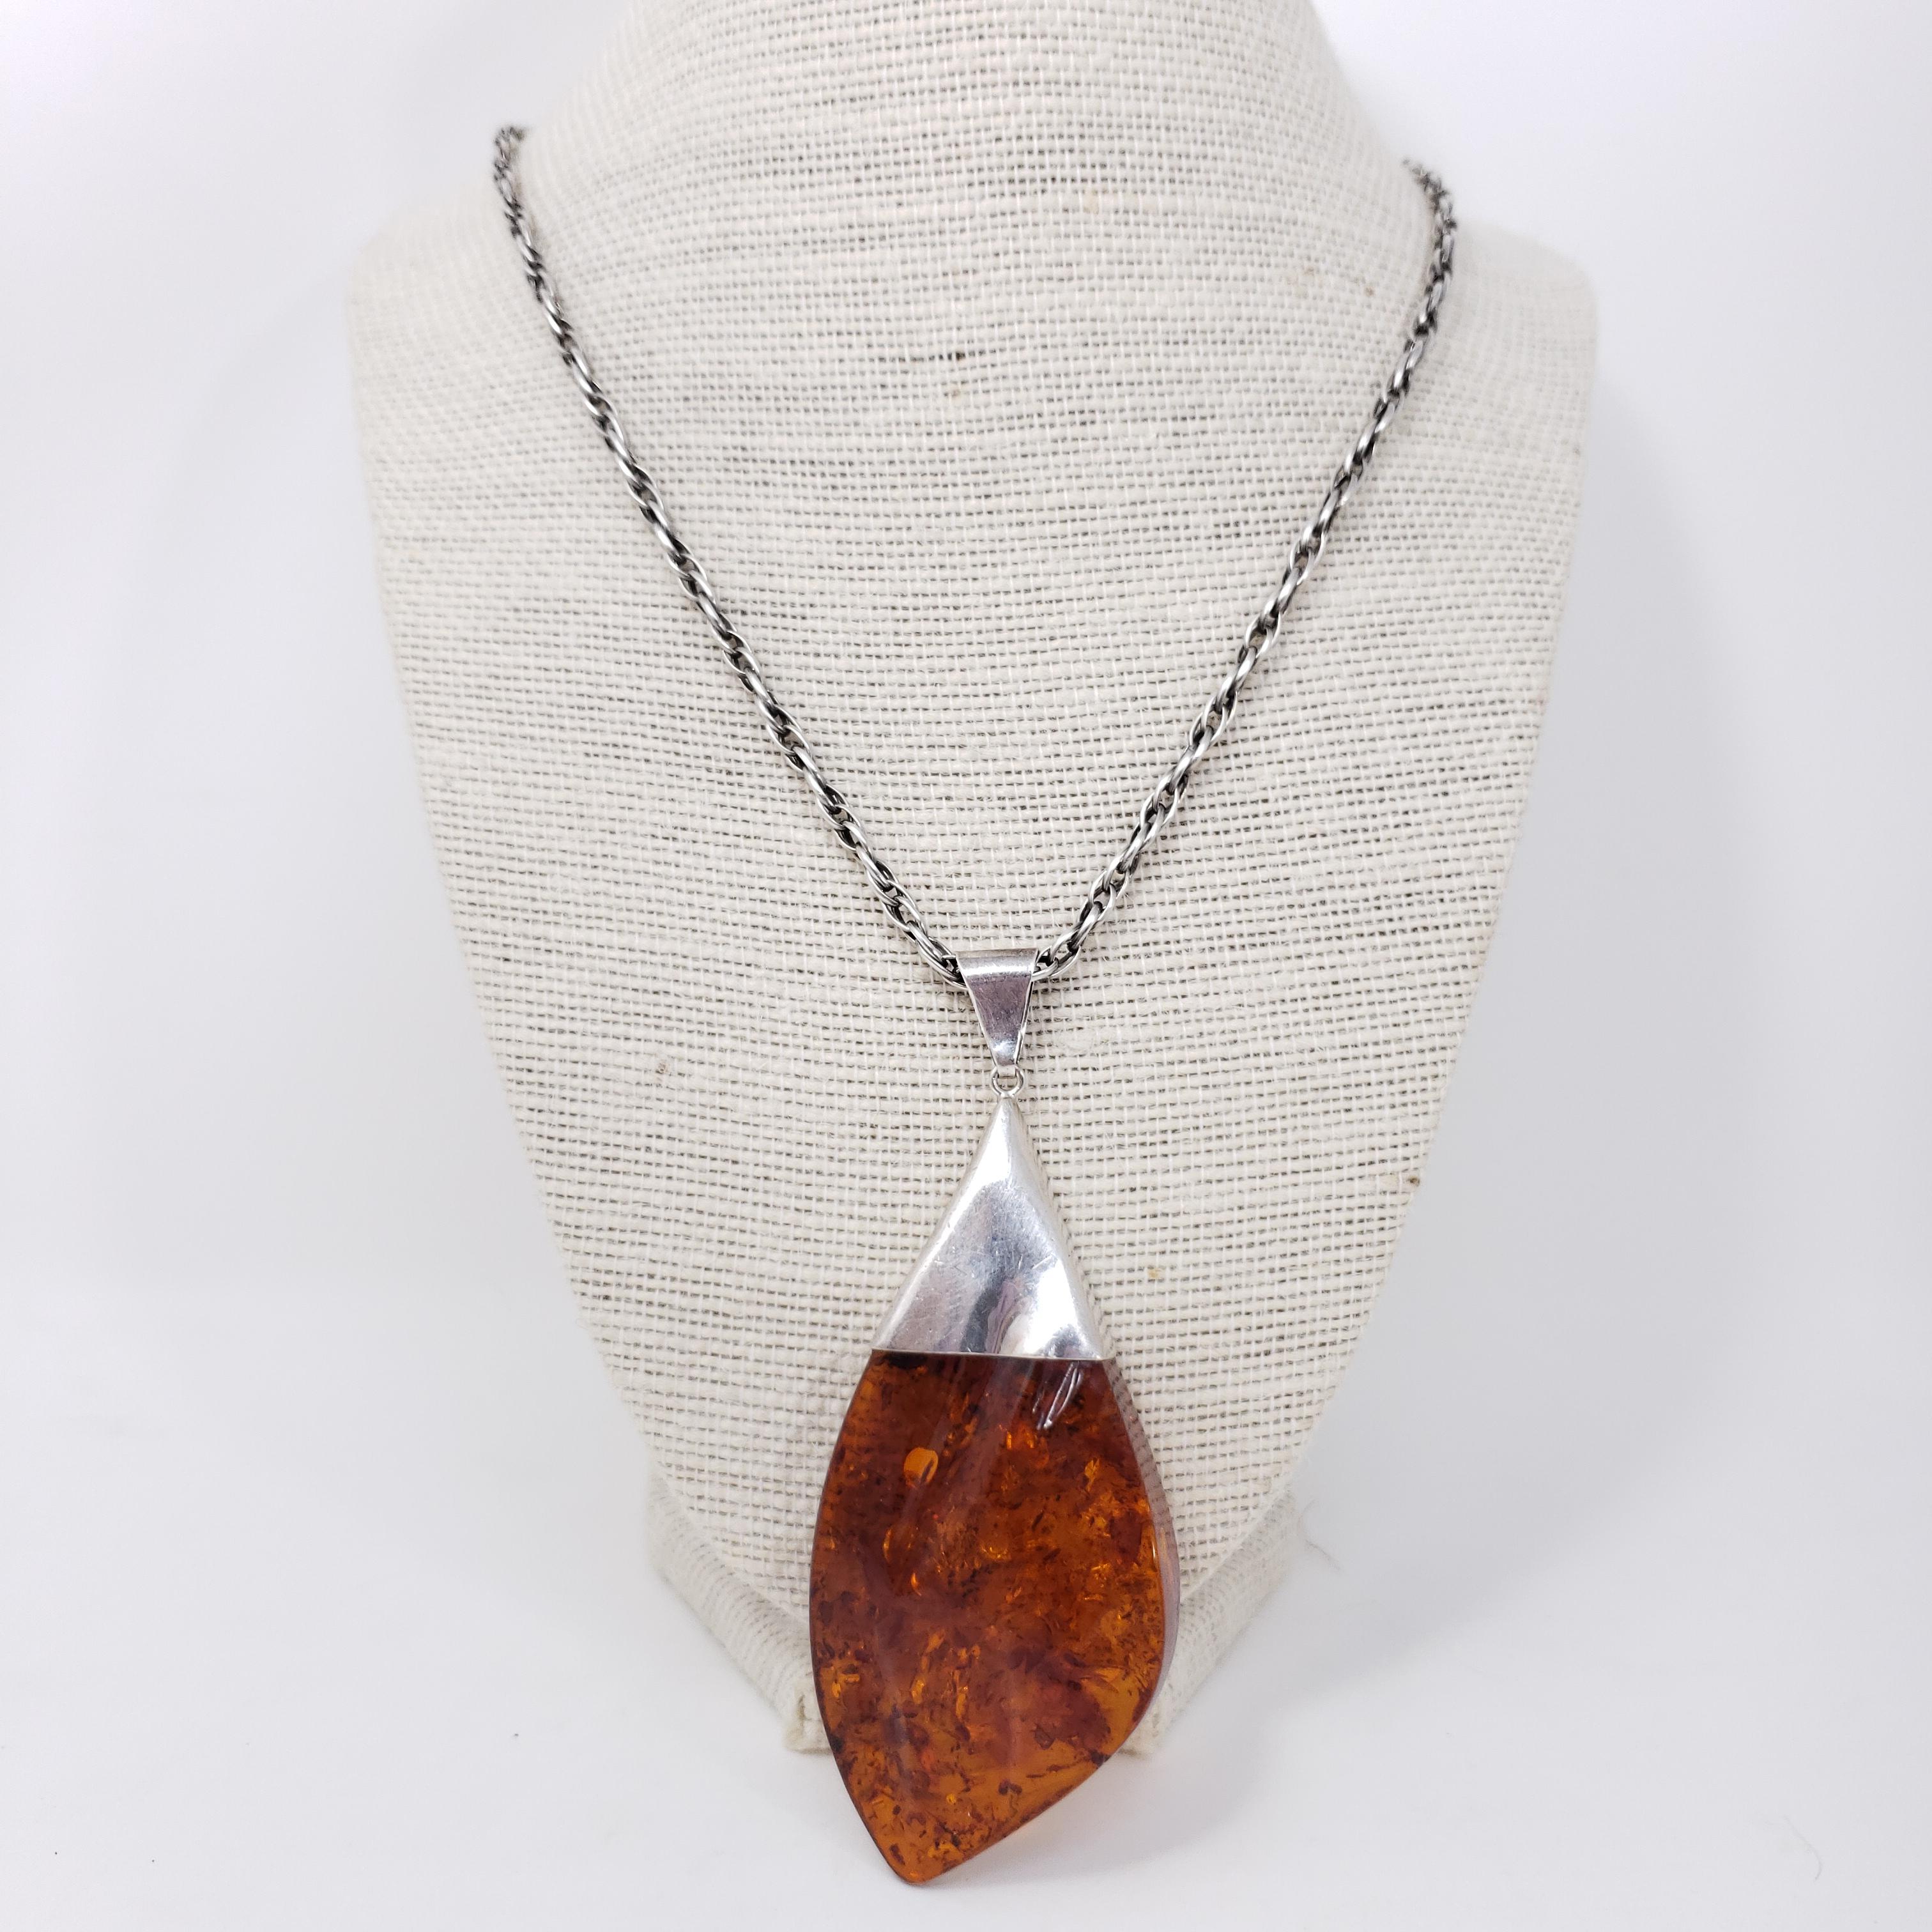 Exquisite Russian pendant, featuring a beautifully-carved genuine Baltic amber cabochon on a stylish silver chain chain.

Sterling Silver.

Necklace length: 25 inches / 63.5 cm
Pendant dimensions: 3.25 x 1.5 in / 8 x 4 cm